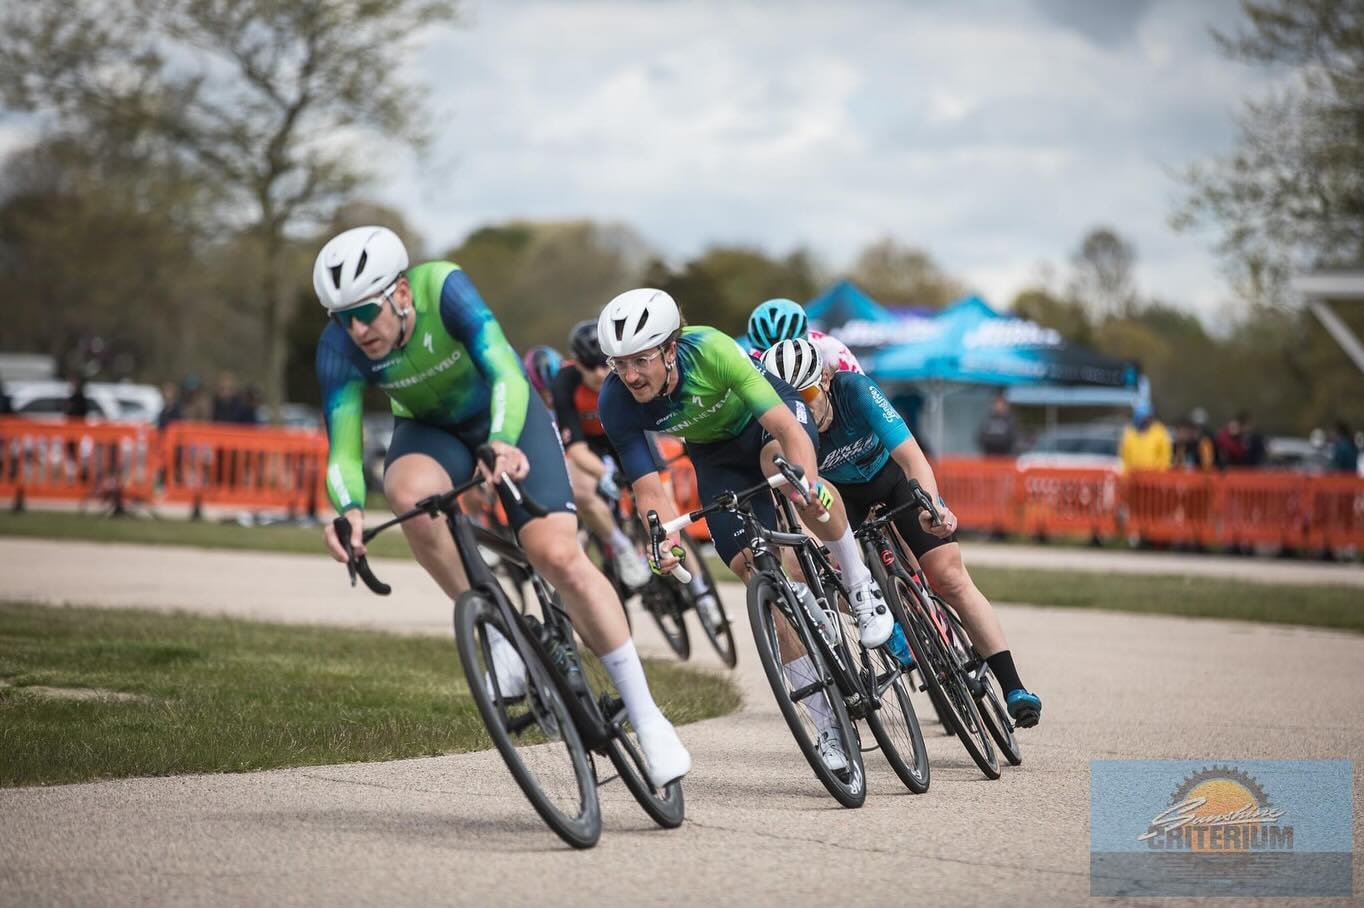 The gang got down to RI to race the Sunshine Criterium presented by Swansea Velo Club at Ninigret State Park on Saturday! AJ, Brennan, Davis, Lance, and Laszlo turned up for the P123 field, while Jimmy held it down solo in the 4/5 field. 

Both races